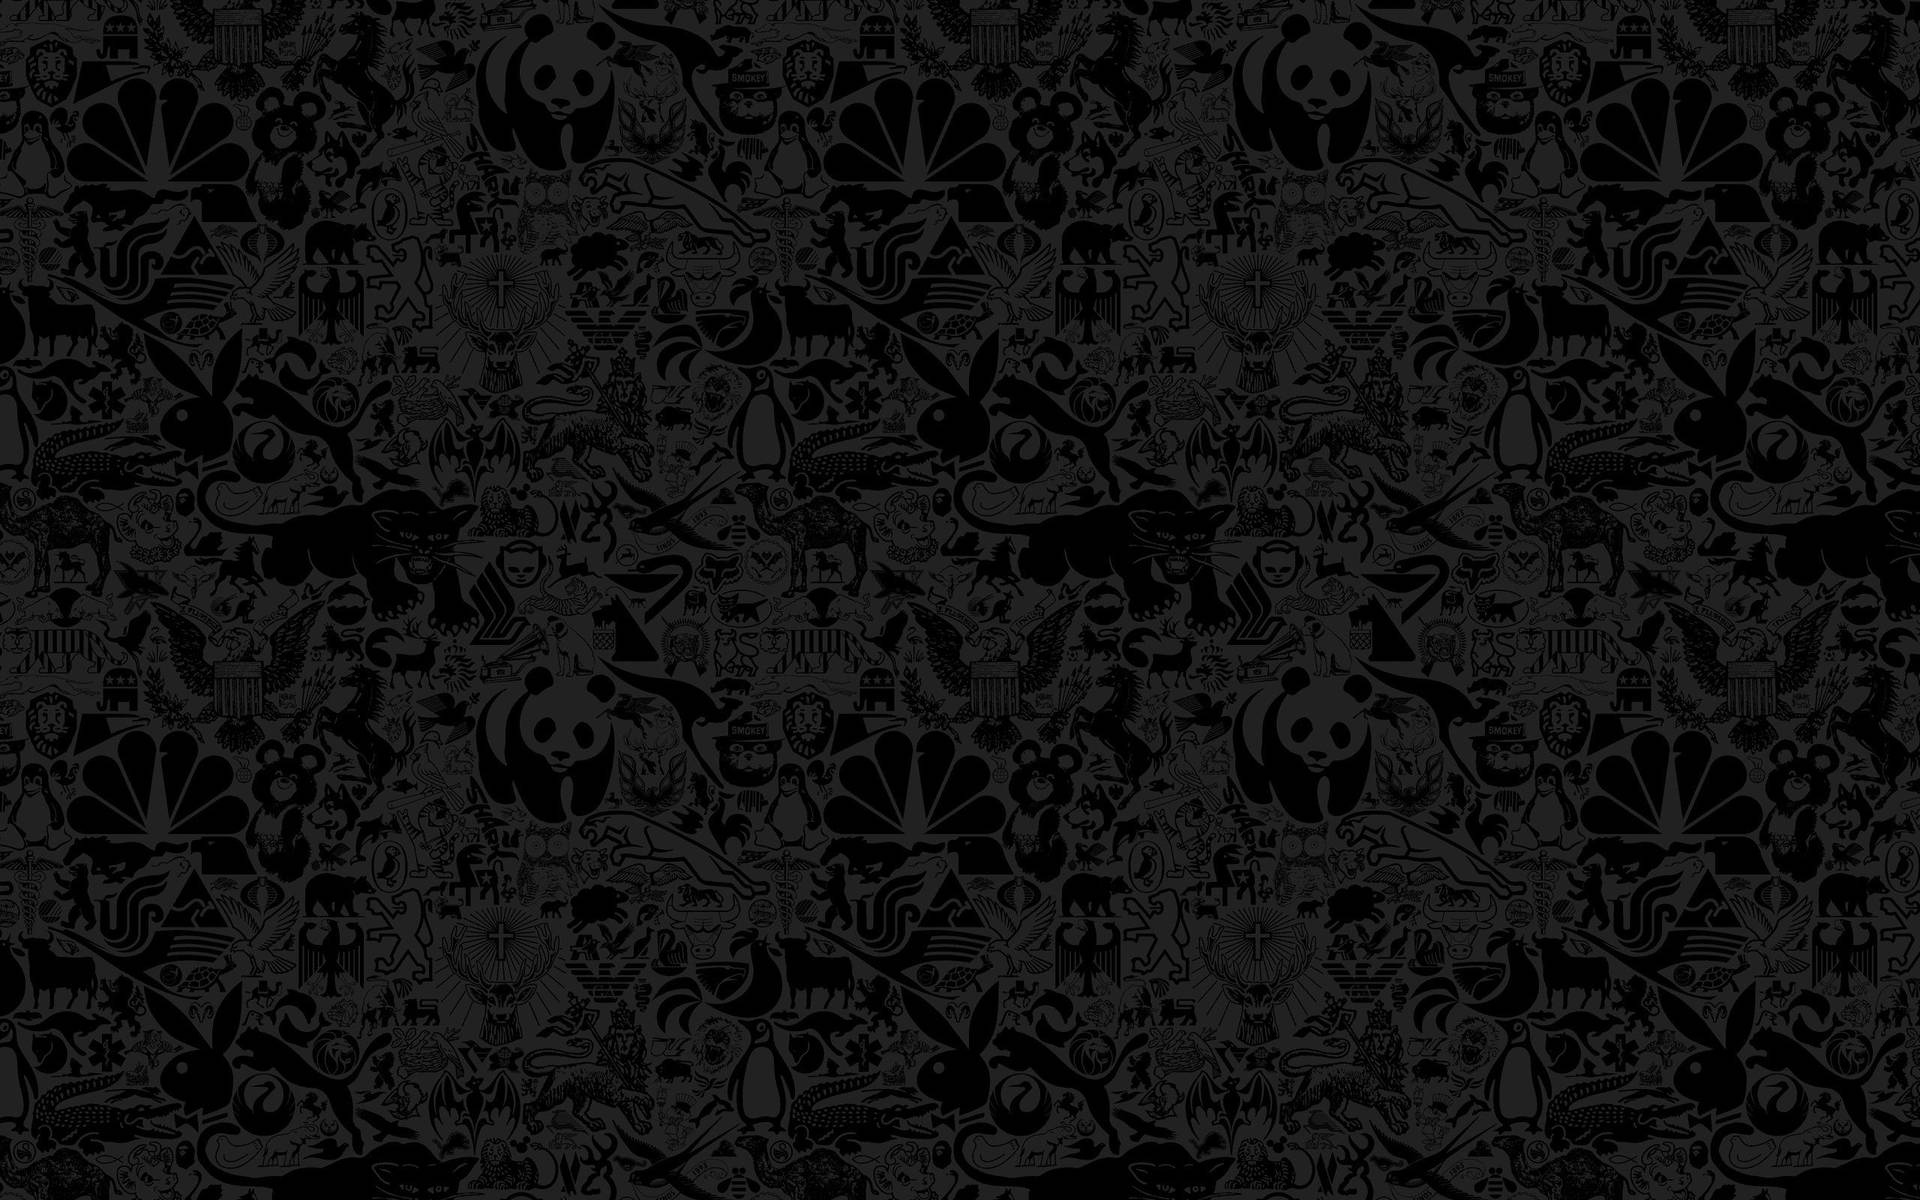 Black animals compiled together in grey background, animated HD wallpaper.